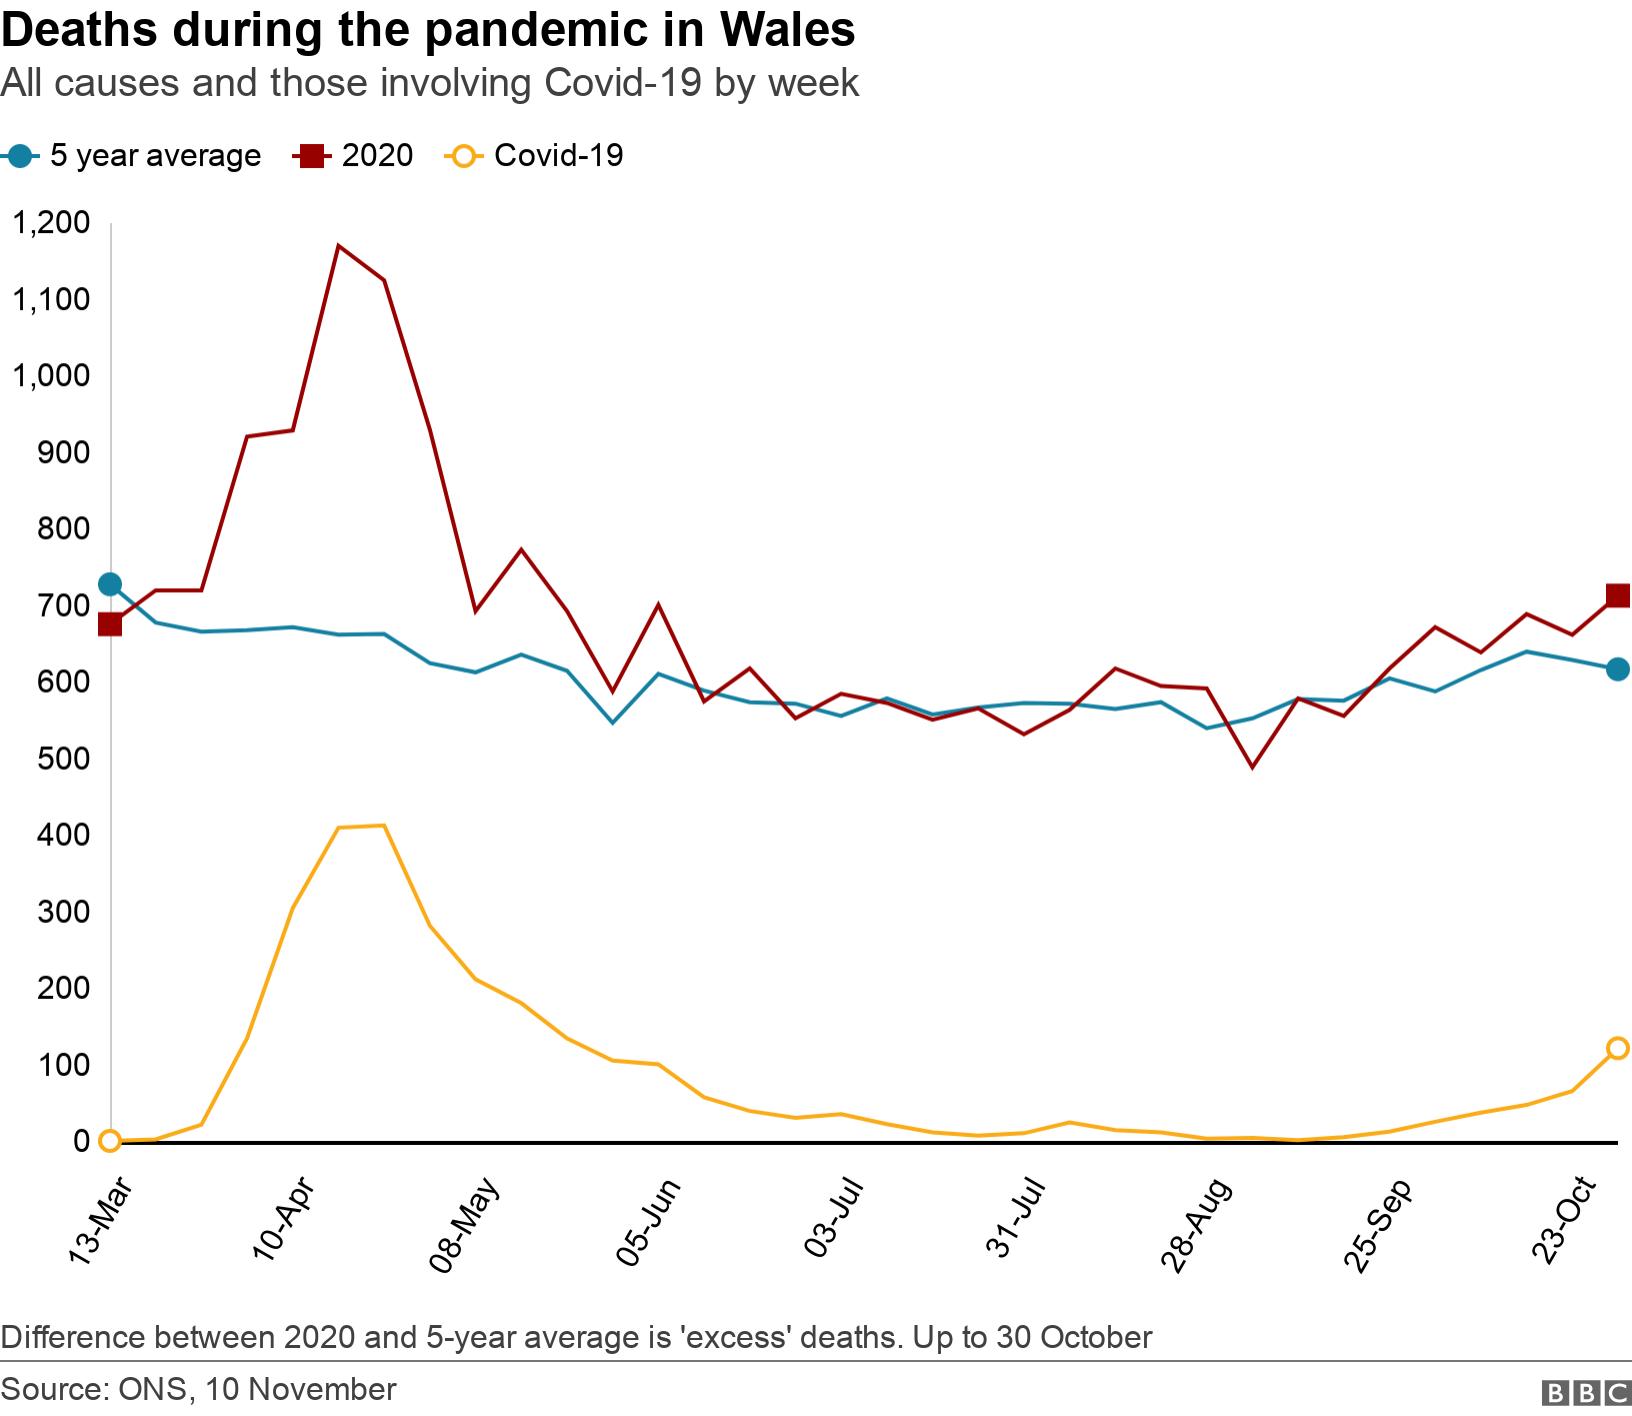 Deaths during the pandemic in Wales. All causes and those involving Covid-19 by week. Difference between 2020 and 5-year average is &#39;excess&#39; deaths. Up to 30 October.